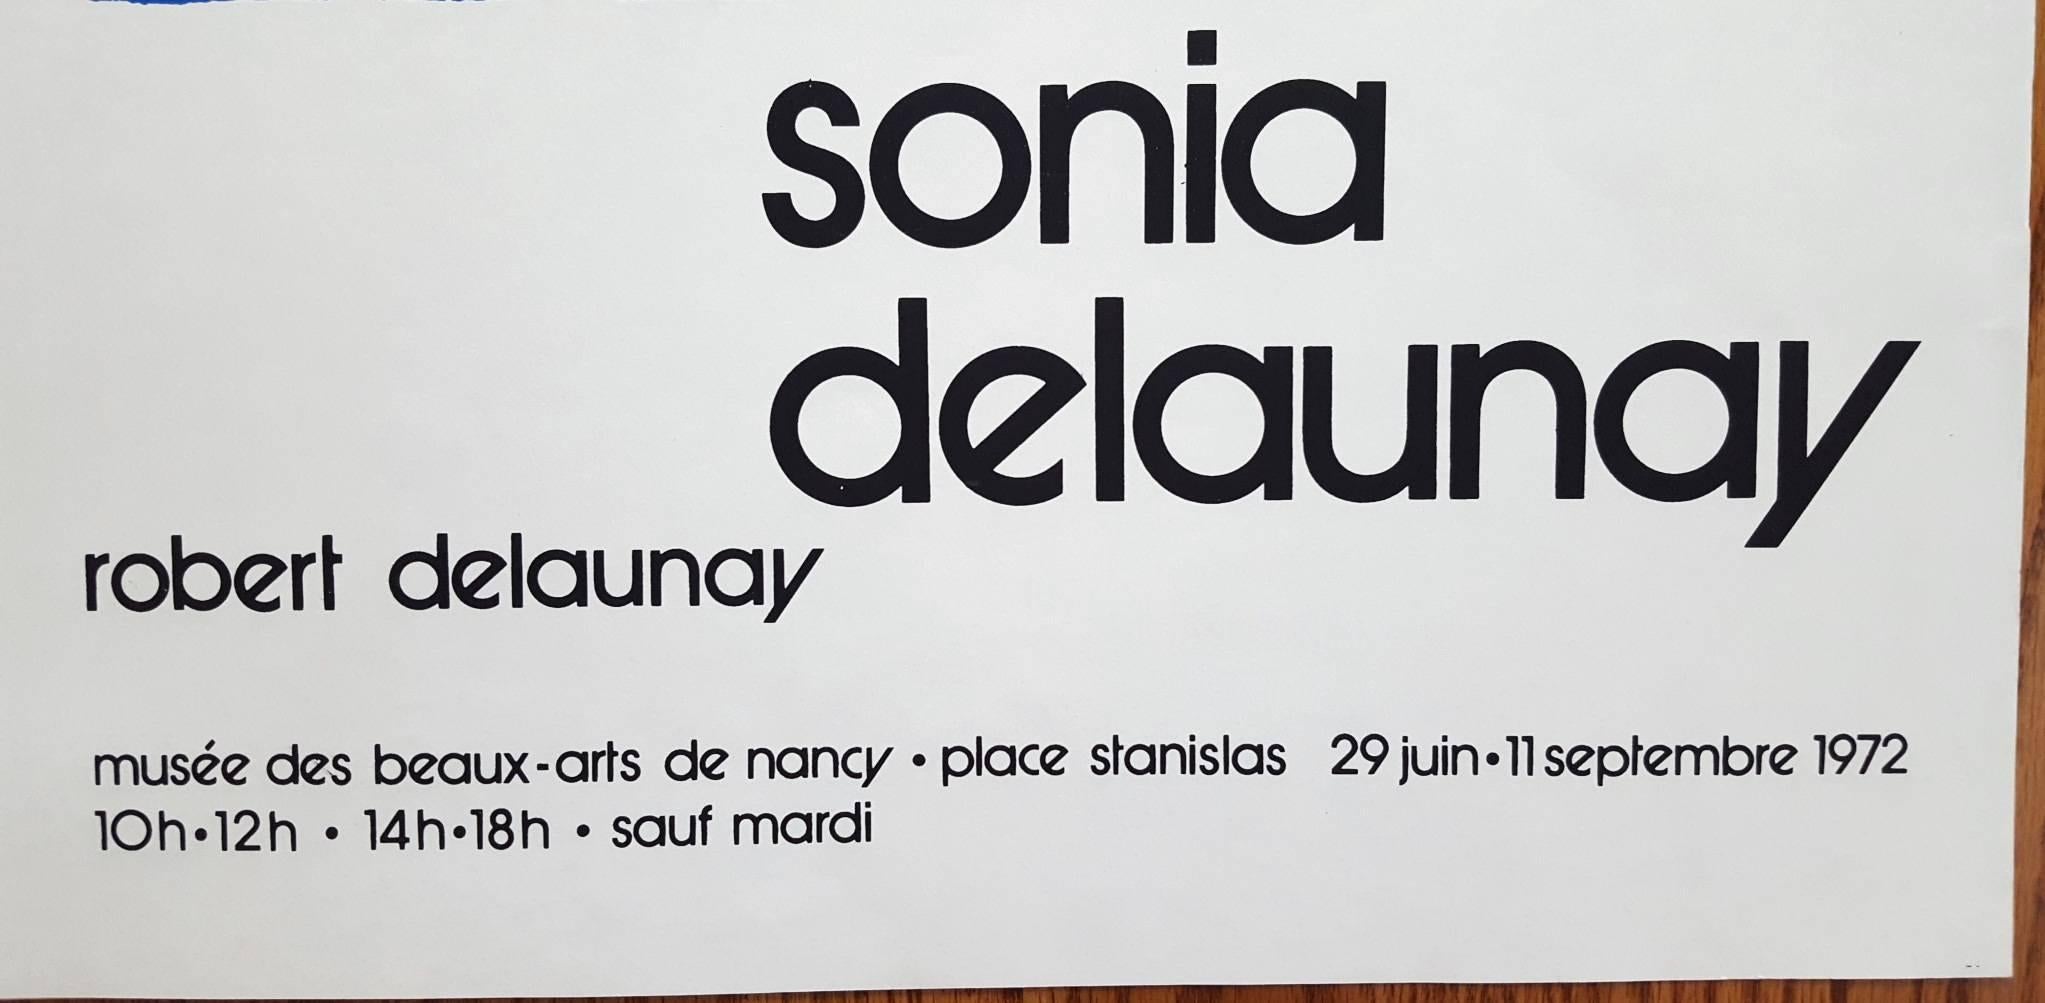 Musee des Beaux-Arts: Sonia Delaunay & Robert Delaunay - Print by (after) Sonia Delaunay